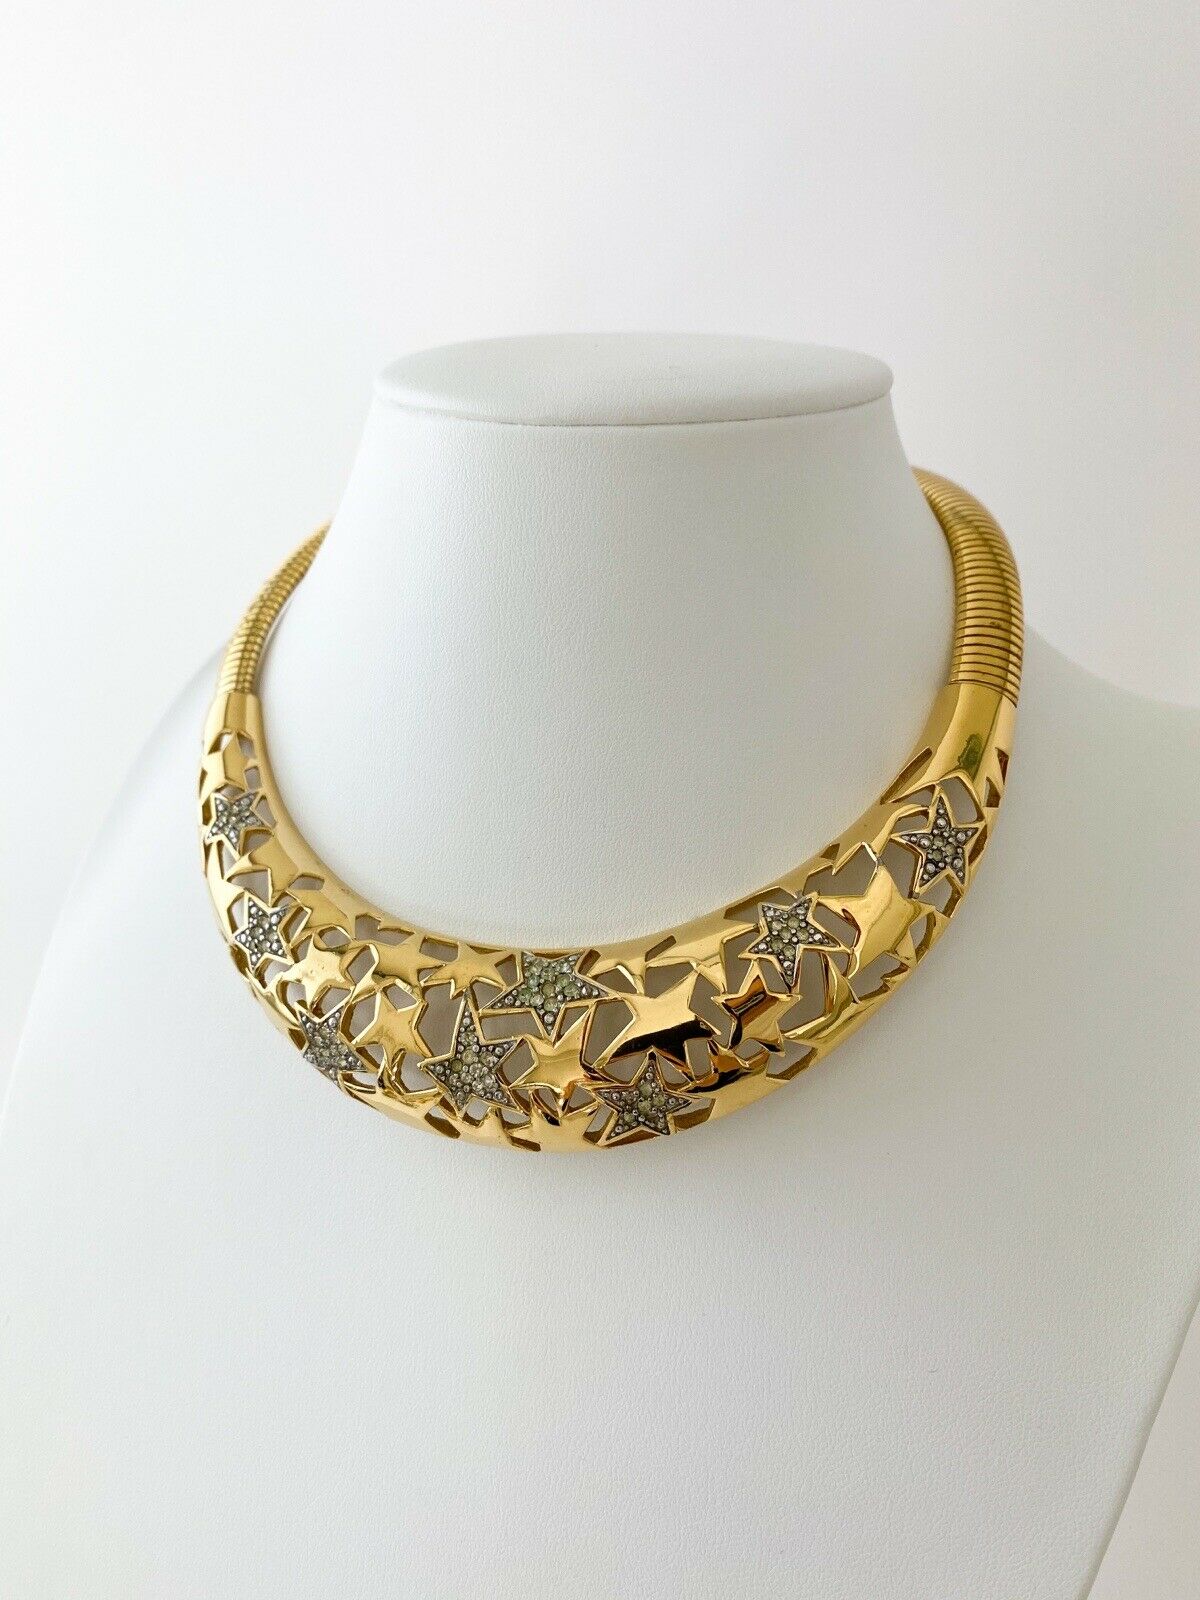 【SOLD OUT】Givenchy Paris New York Vintage Gold Tone Star Collar Necklace Rhinestone